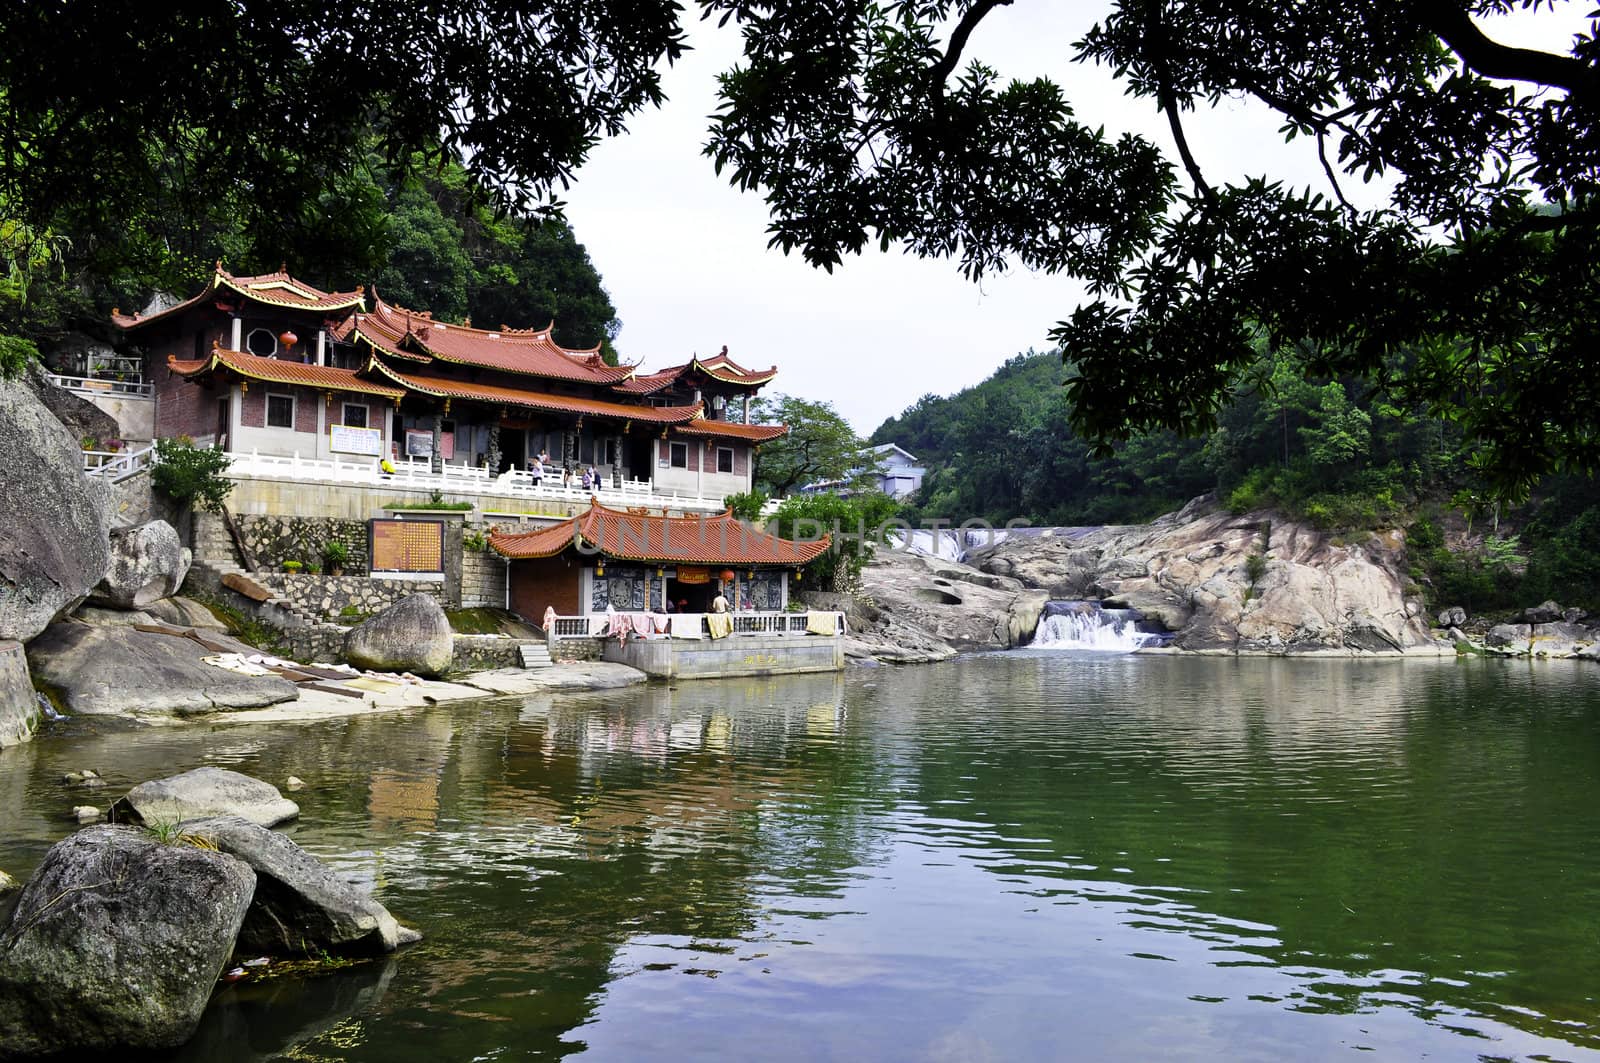 Buddhist temple in china located in the mountains over a river